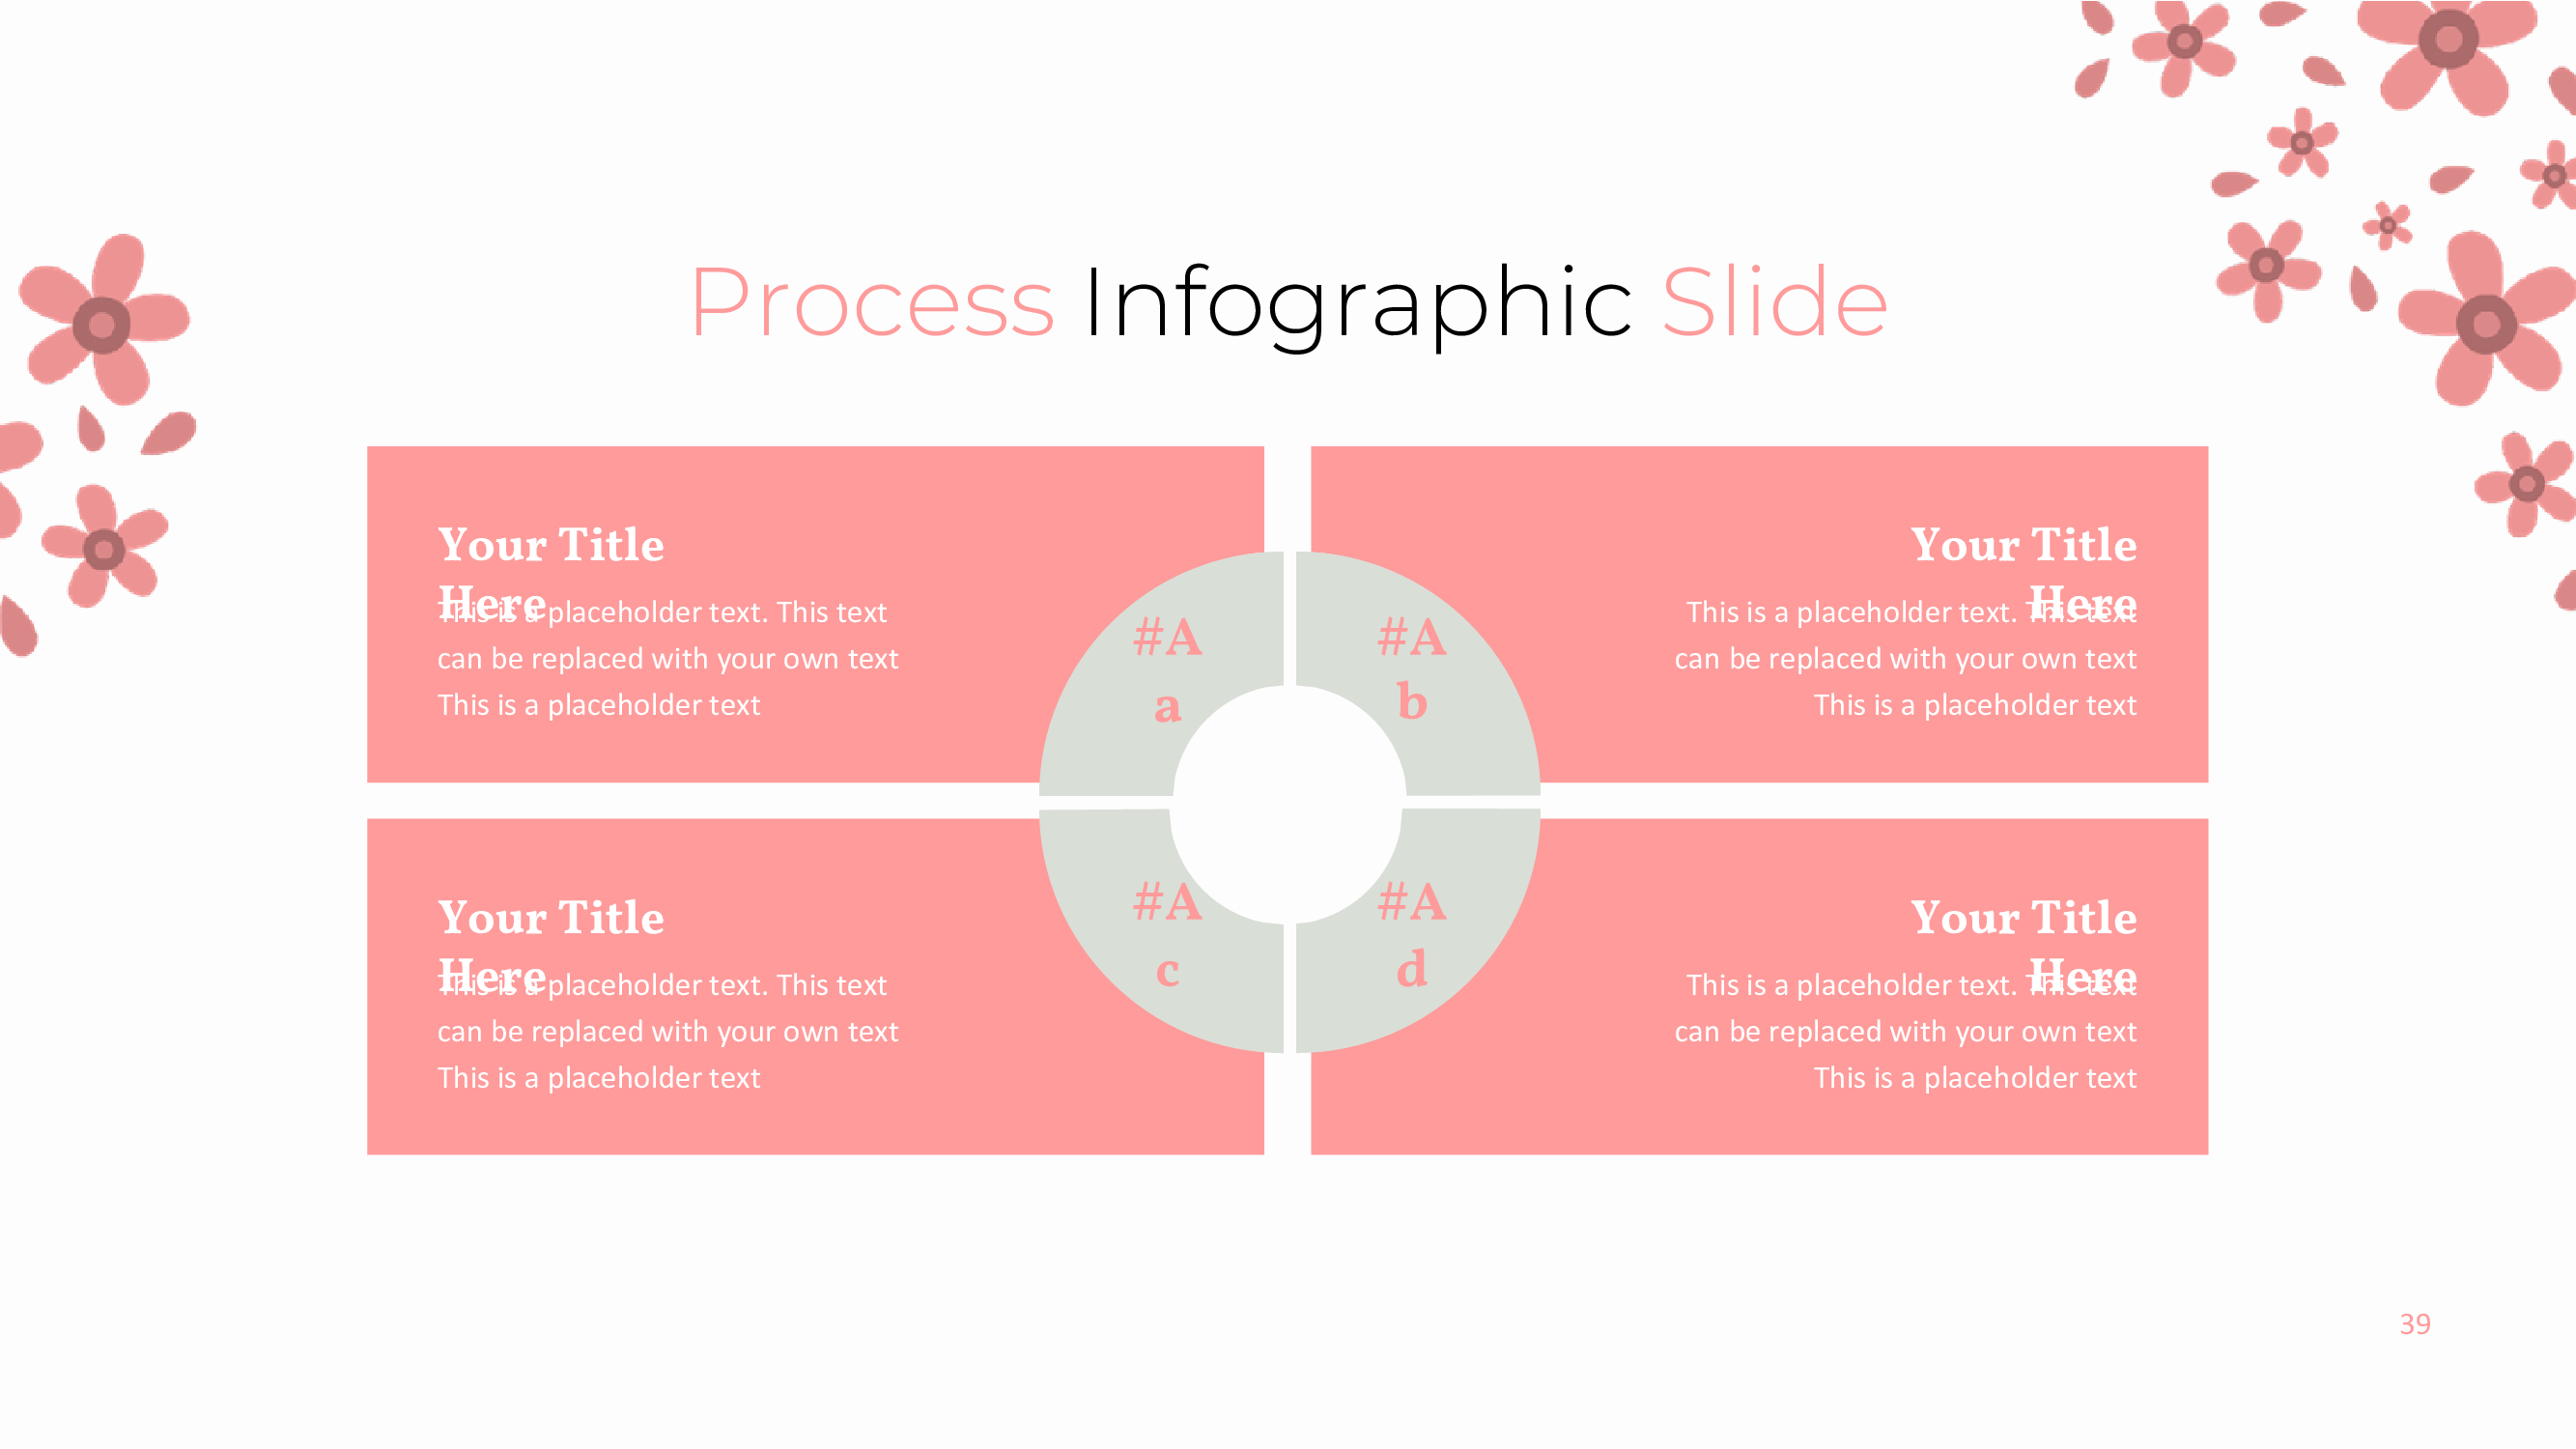 Pink slide with infographic process.